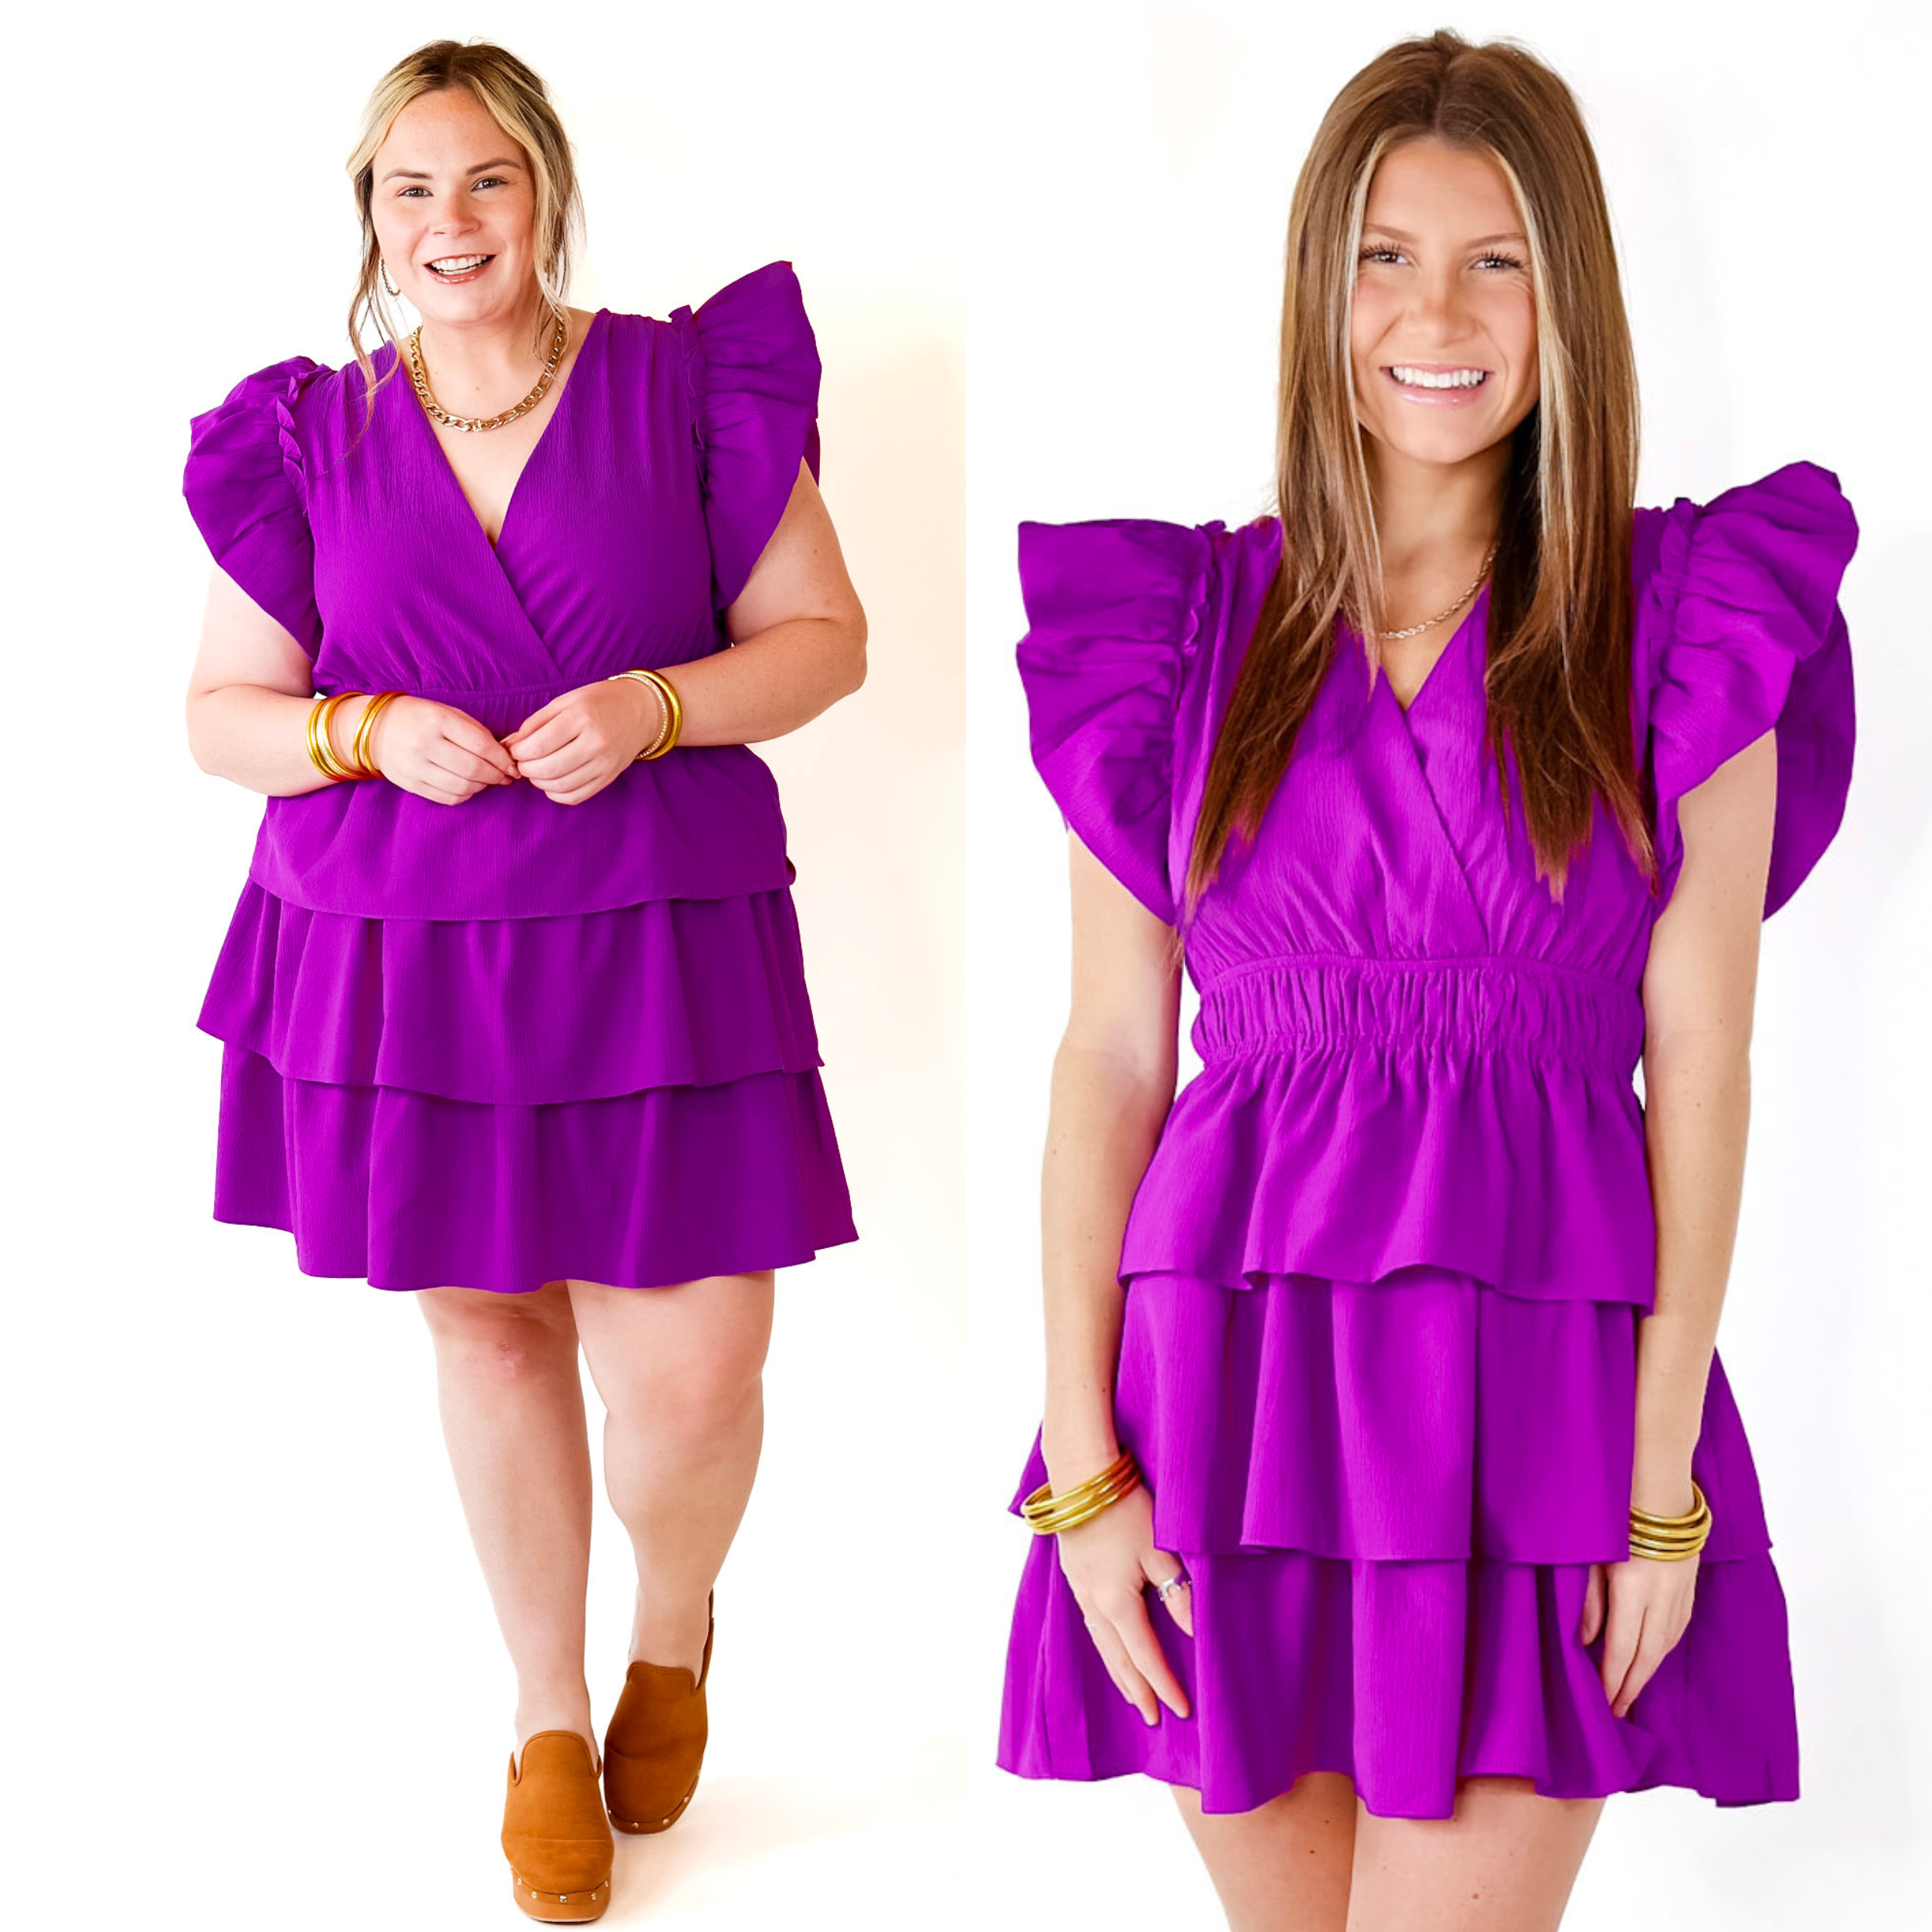 The Perfect Night Ruffle Cap Sleeve Dress in Violet Purple - Giddy Up Glamour Boutique